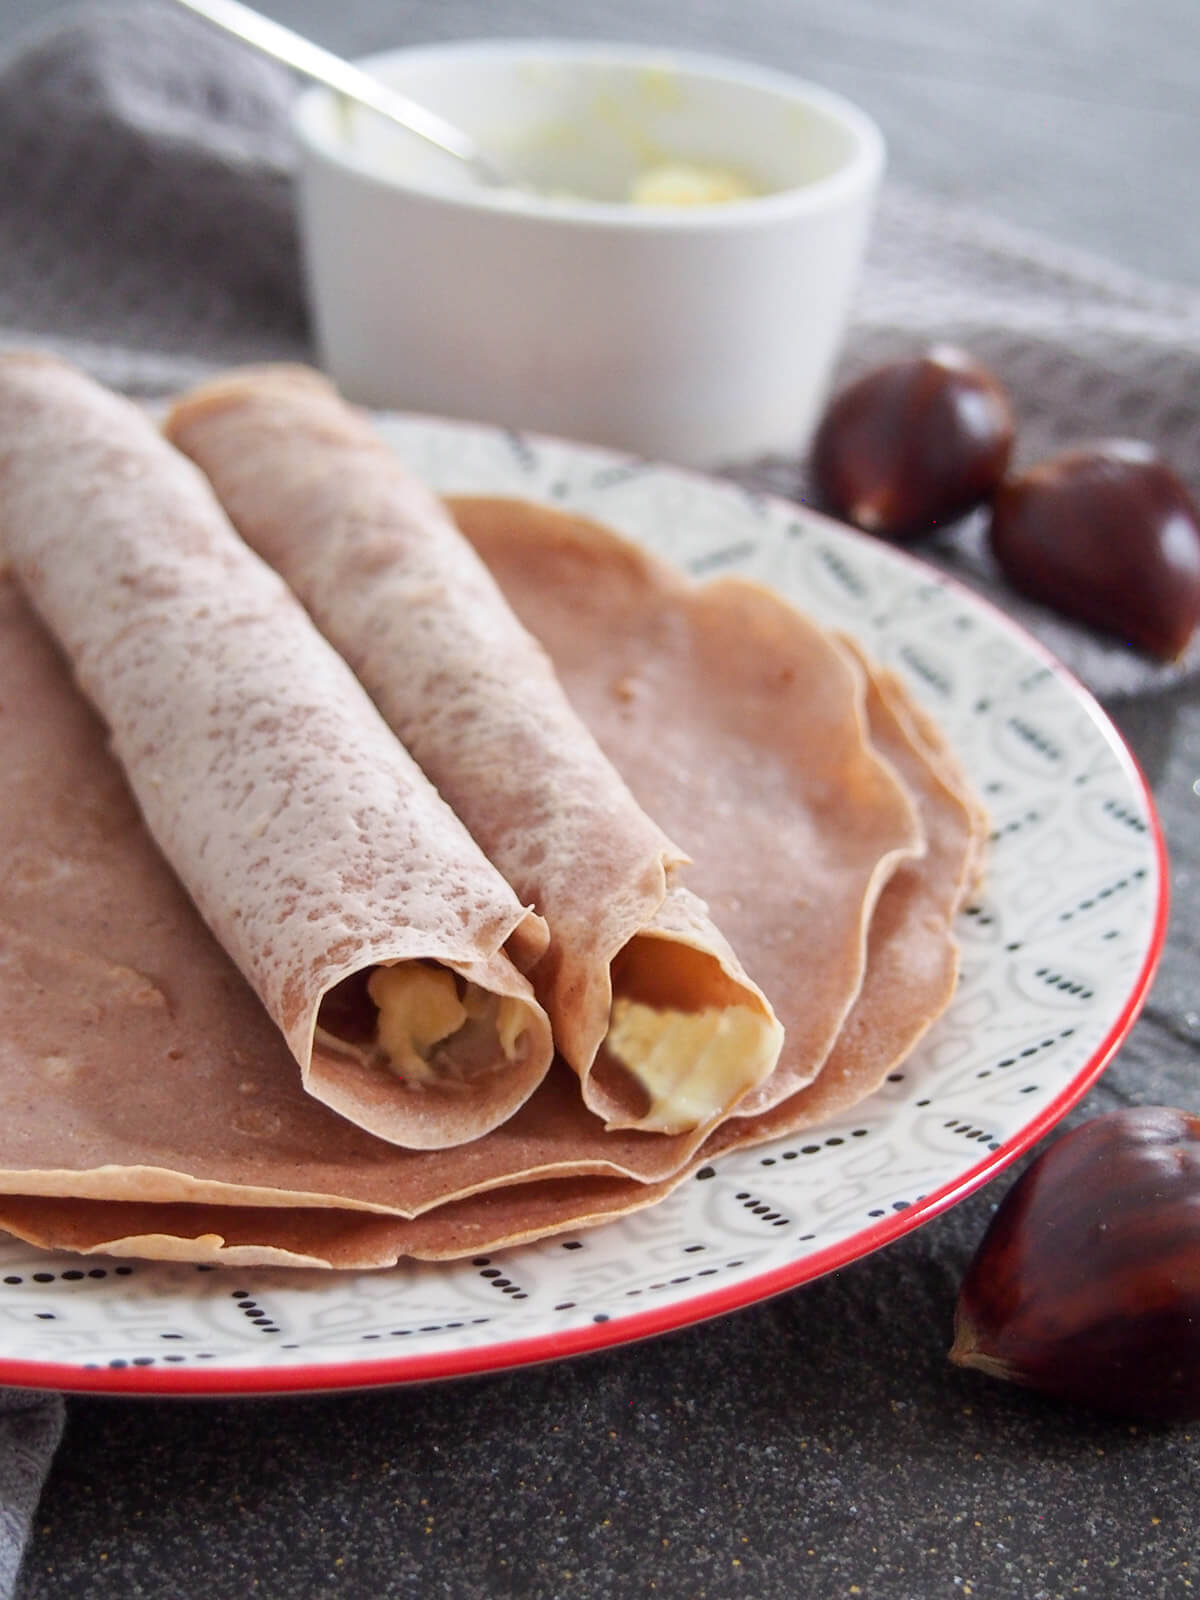 two chestnut crepes rolled up and part view of others under them on plate, small bowl with spoon in it behind